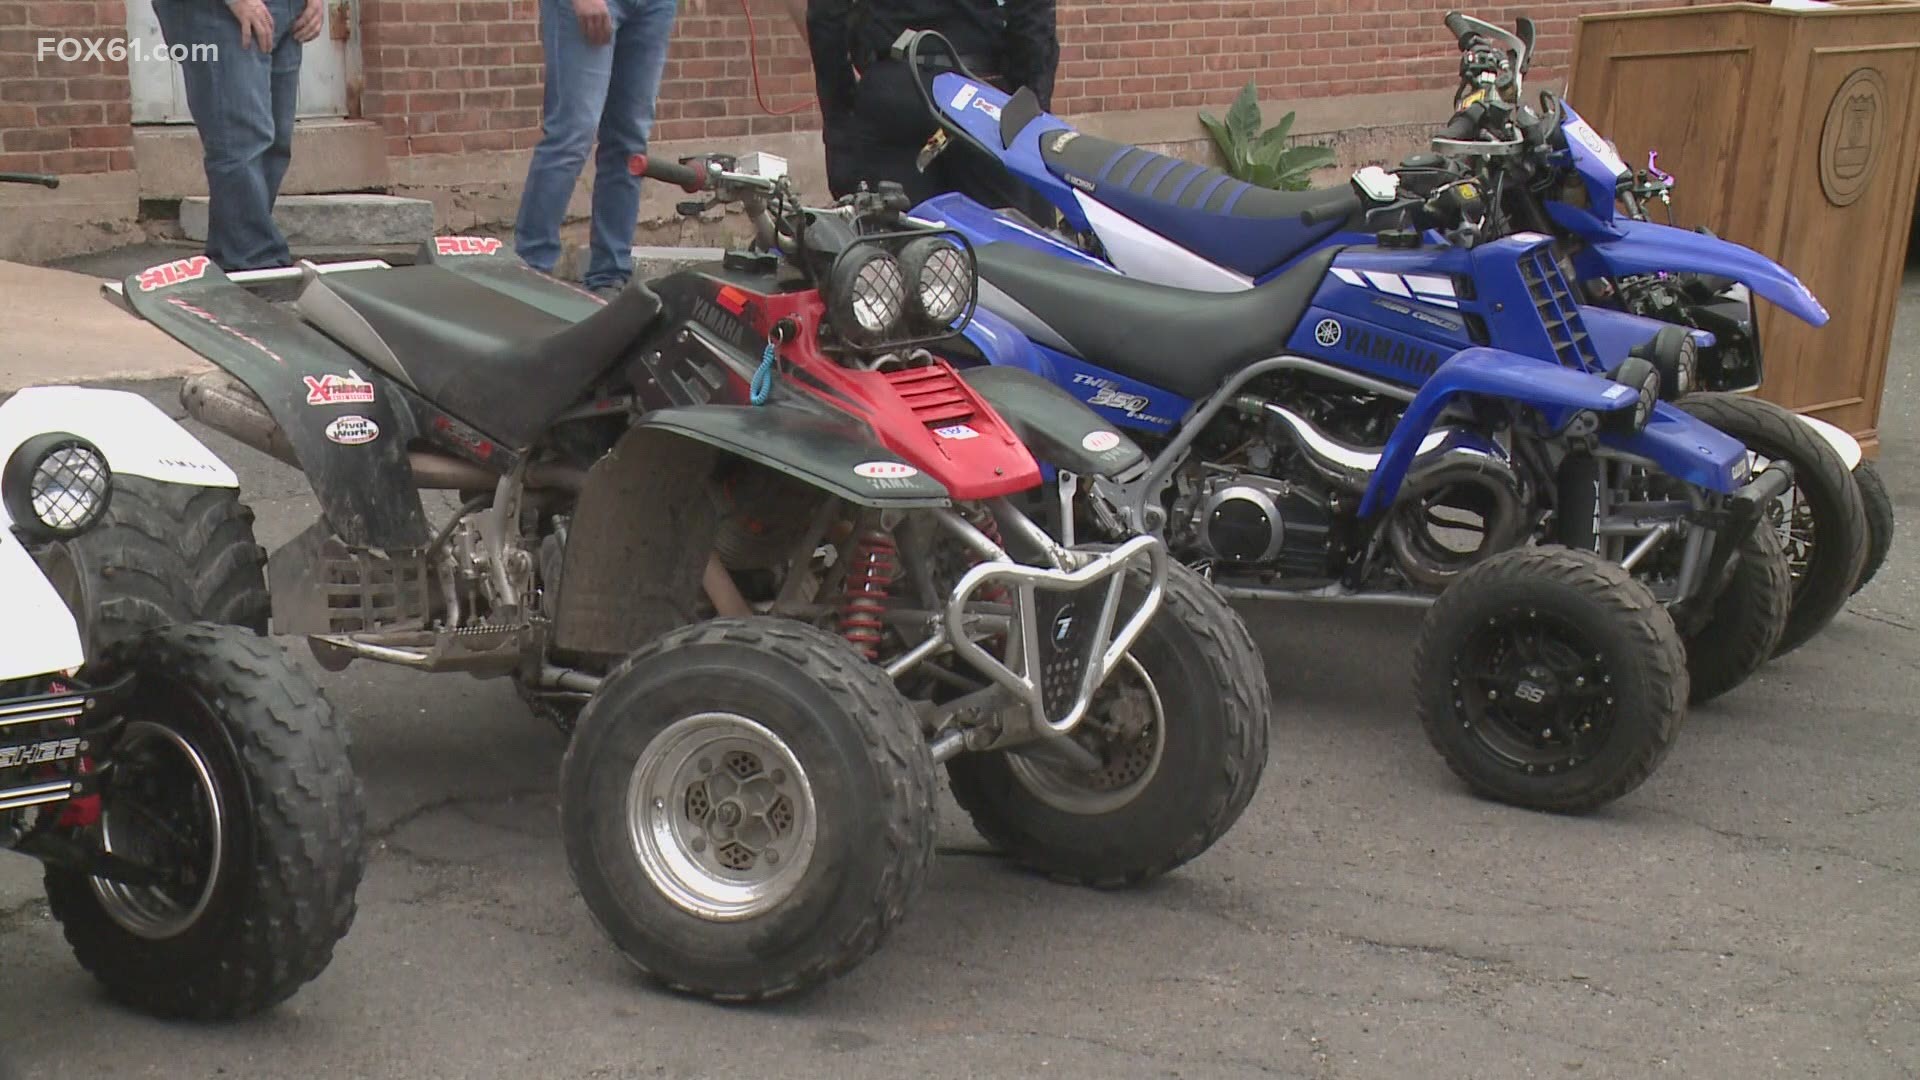 New ordinance in New Haven aims at stopping dirt bike and ATV riders |  